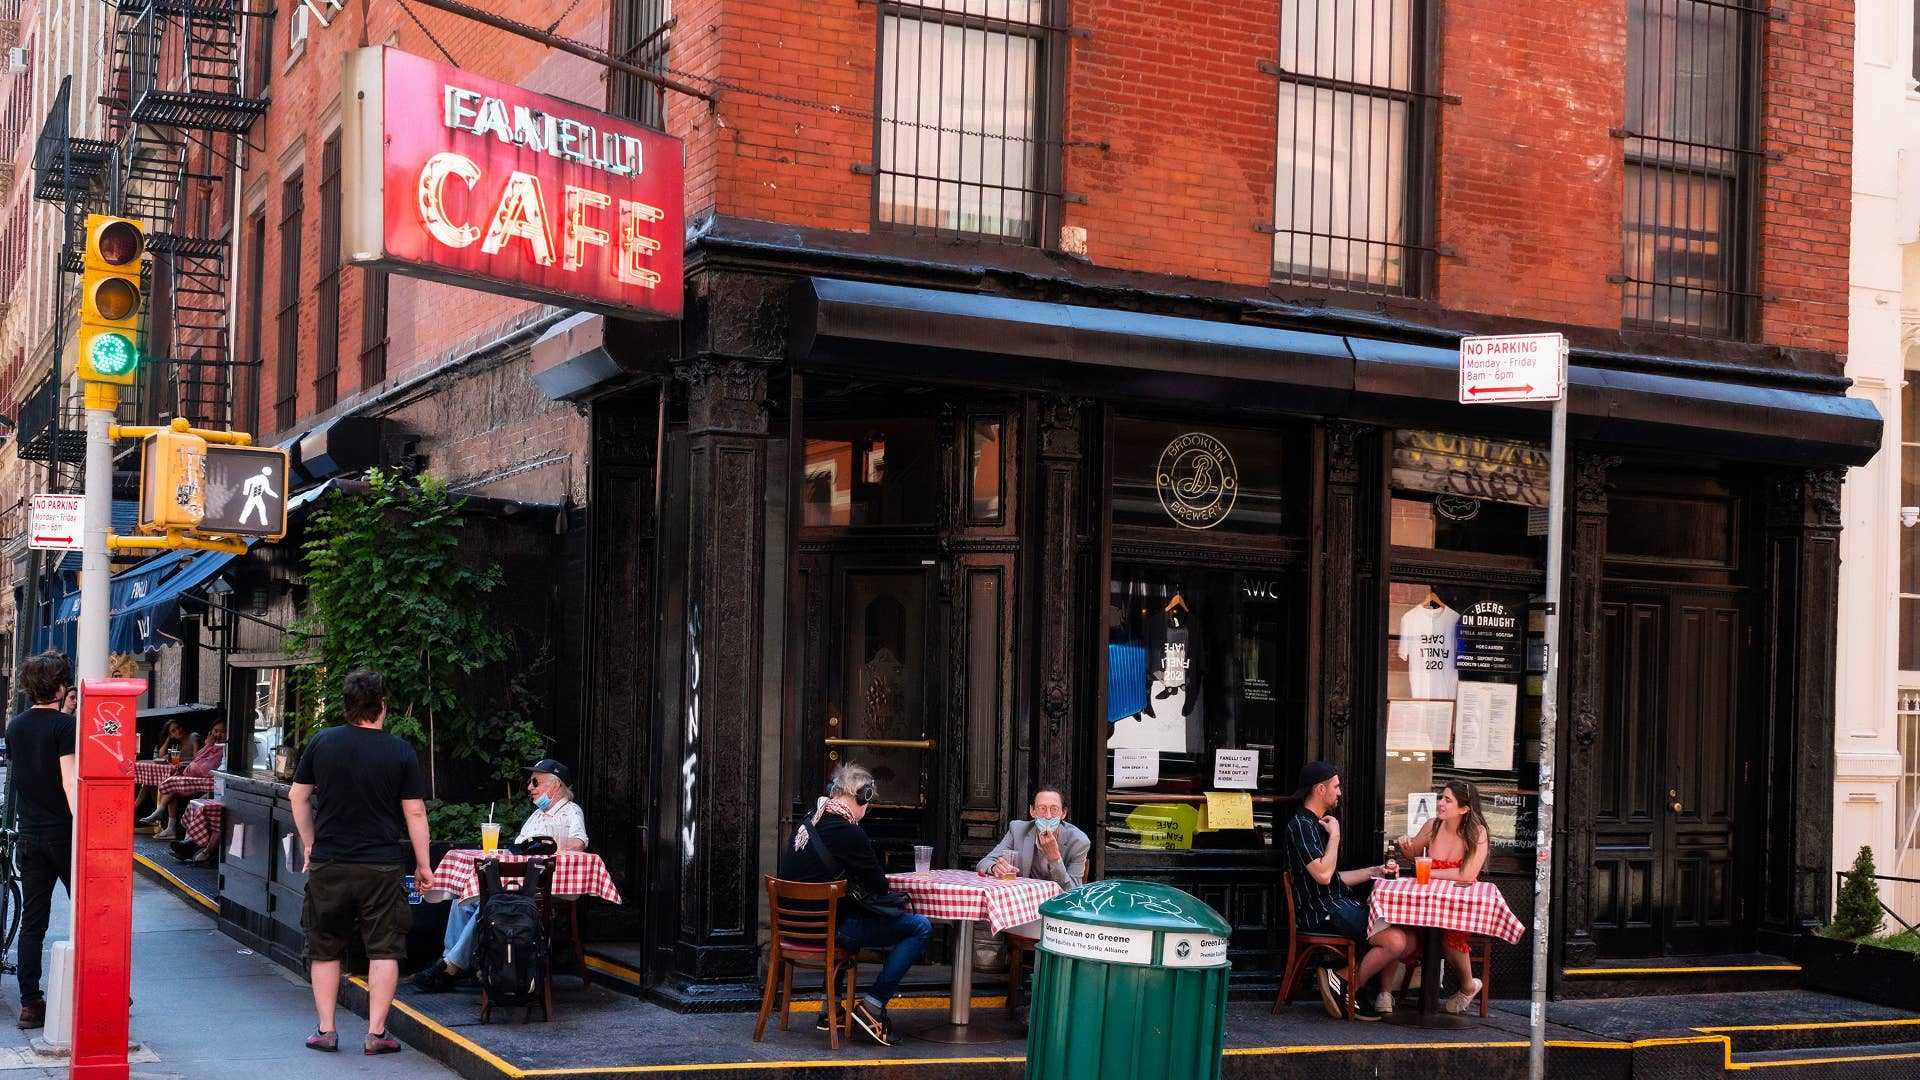 Customers are seen eating outside Fanelli's Cafe in SoHo as the city moves into Phase 2 of reopening.